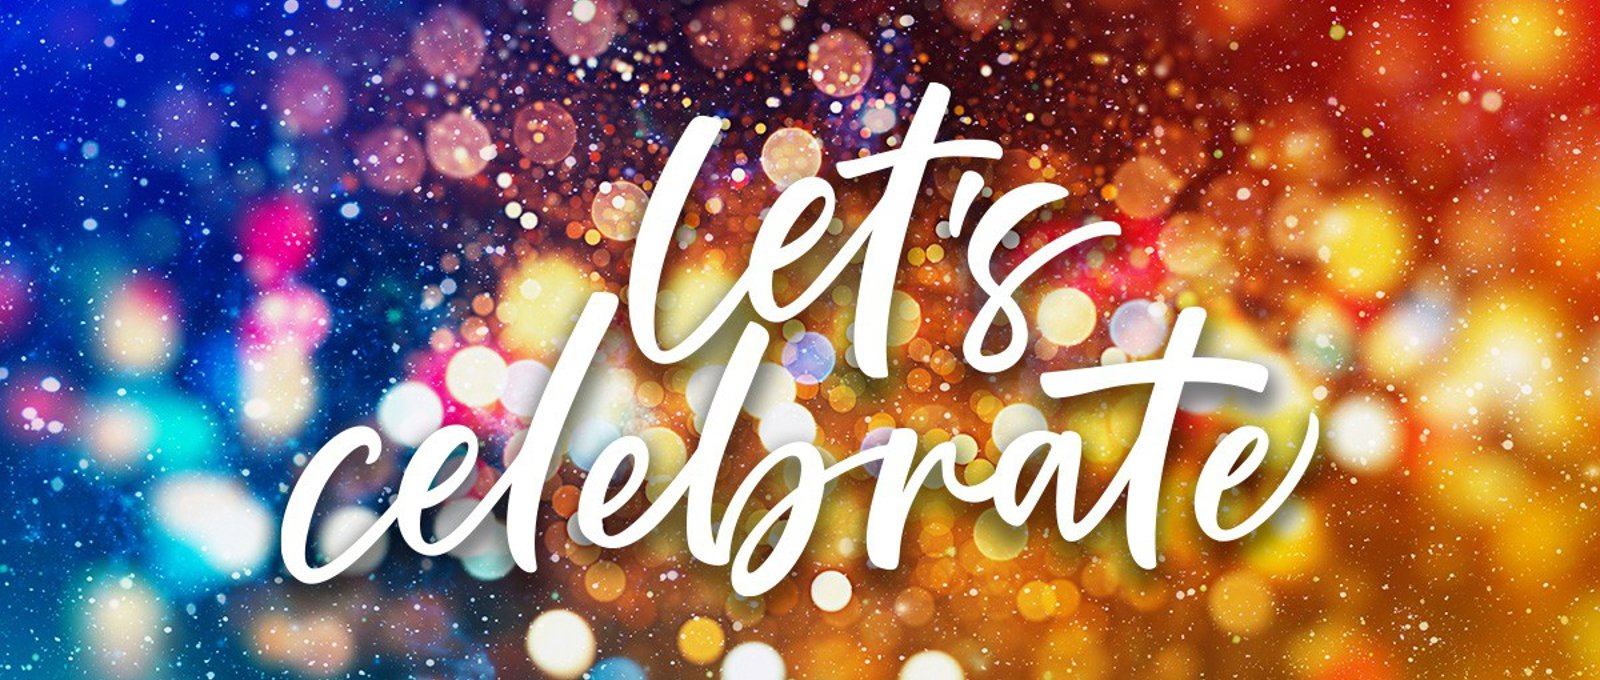 Image of the words 'Let's celebrate' written over an abstract image of sparkles of light